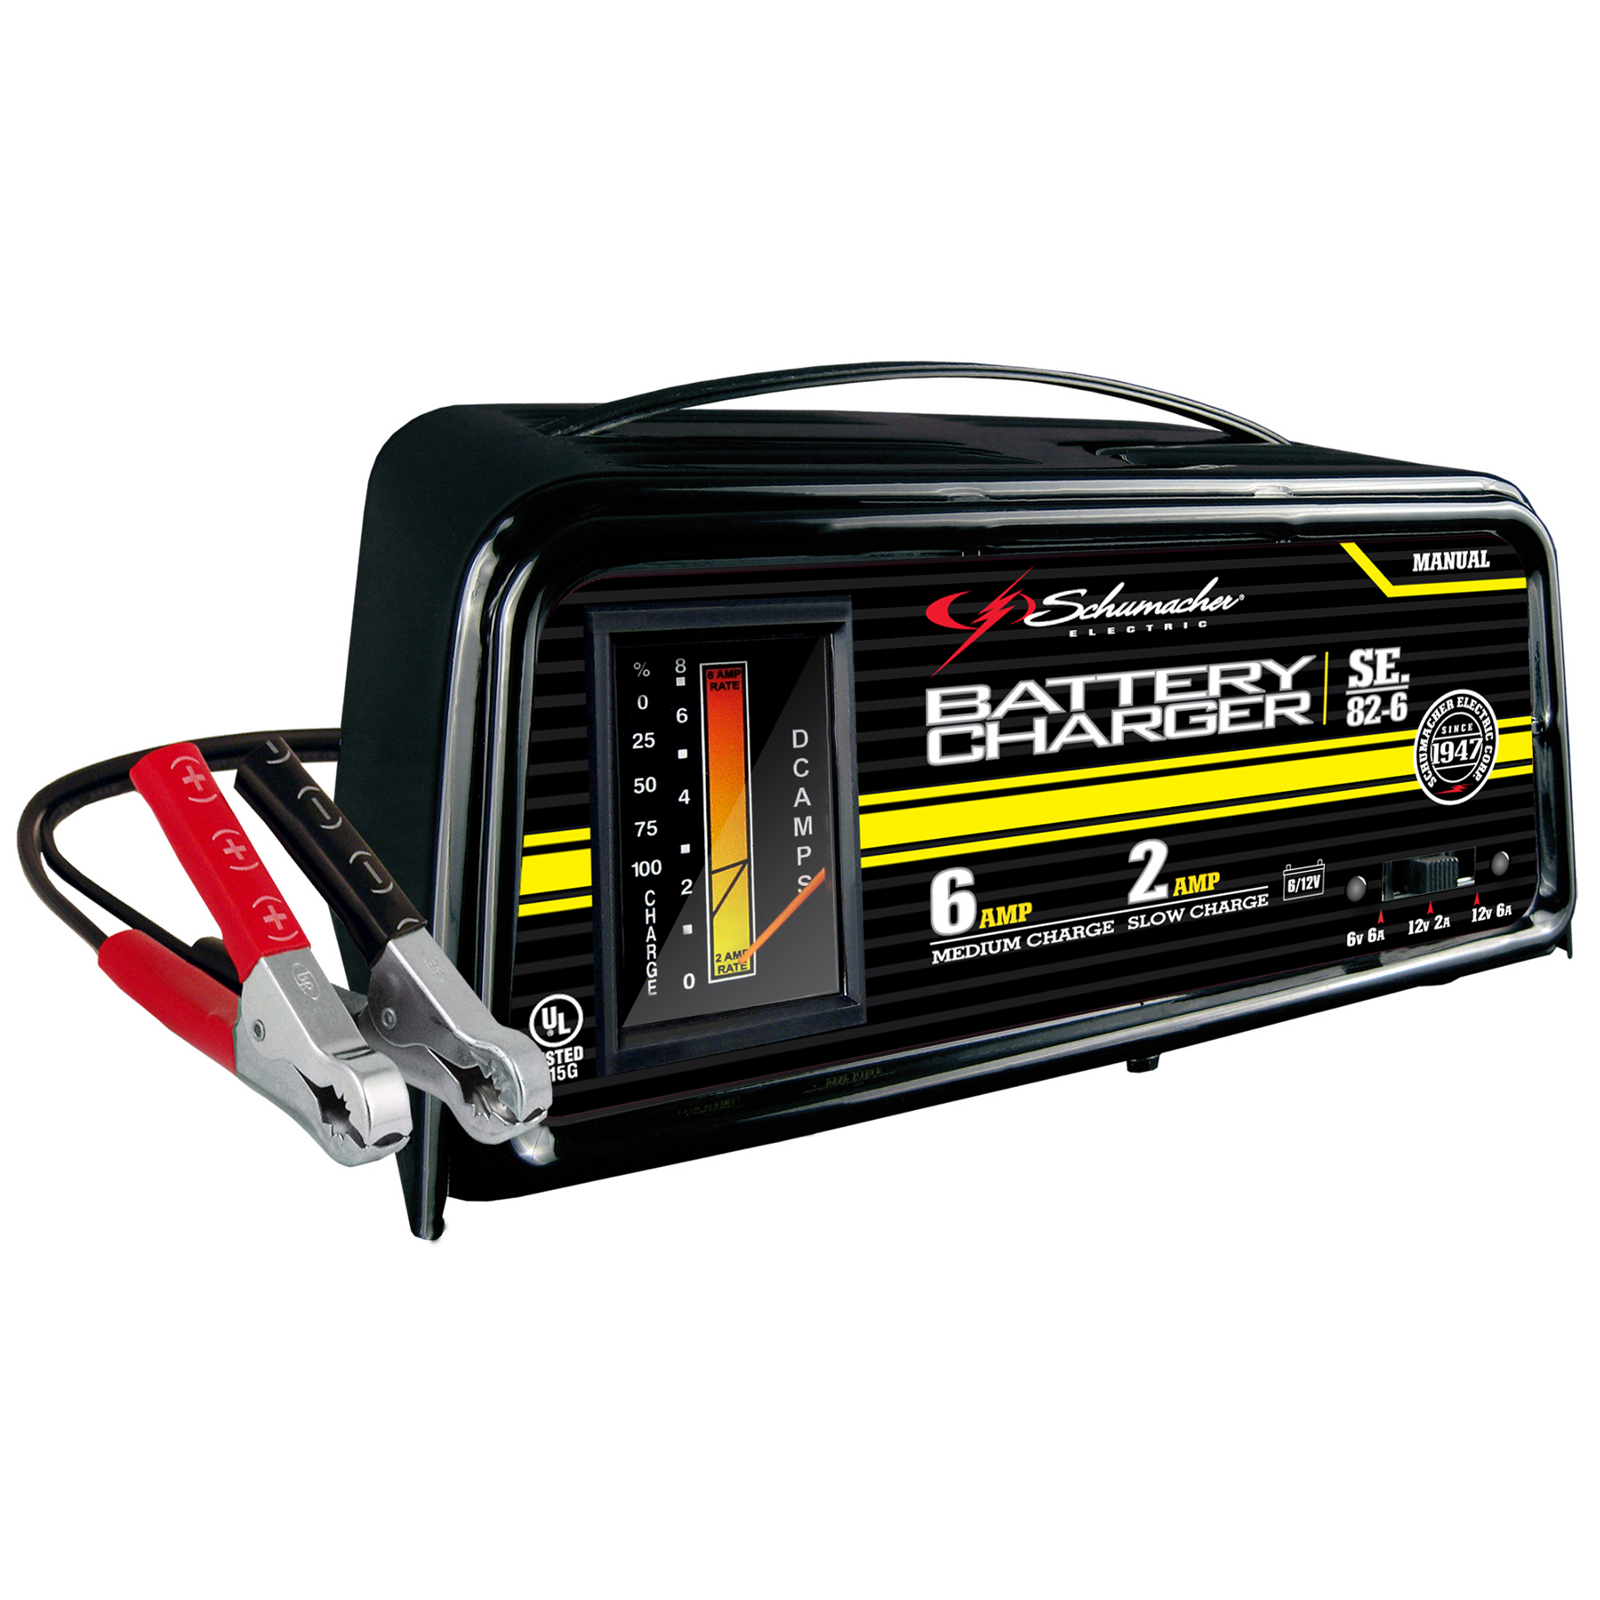 6-Amp Manual Hand-Held Battery Charger